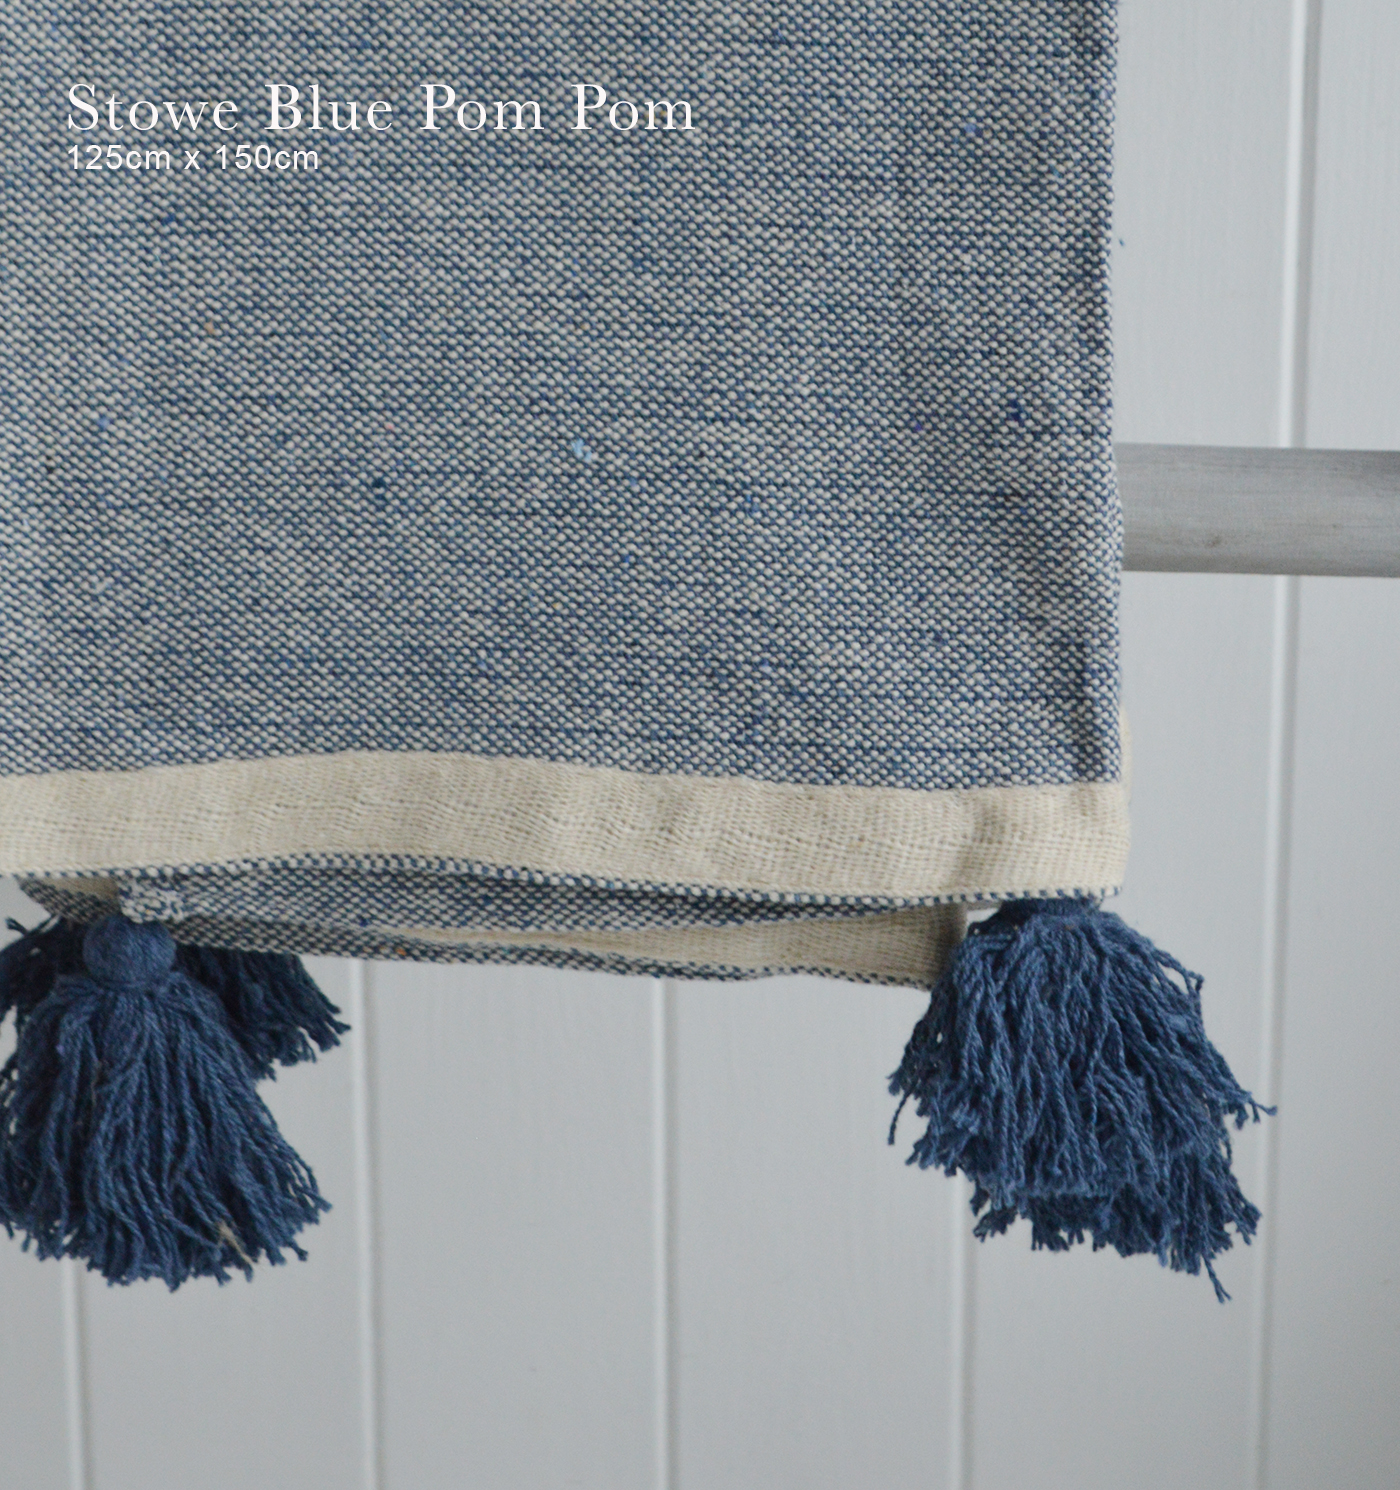 New England Style White Furniture and accessories for the home. Coastal, country and modern farmhouse interiors and furniture. Seabrook blue with Pom Pom throw and blankets